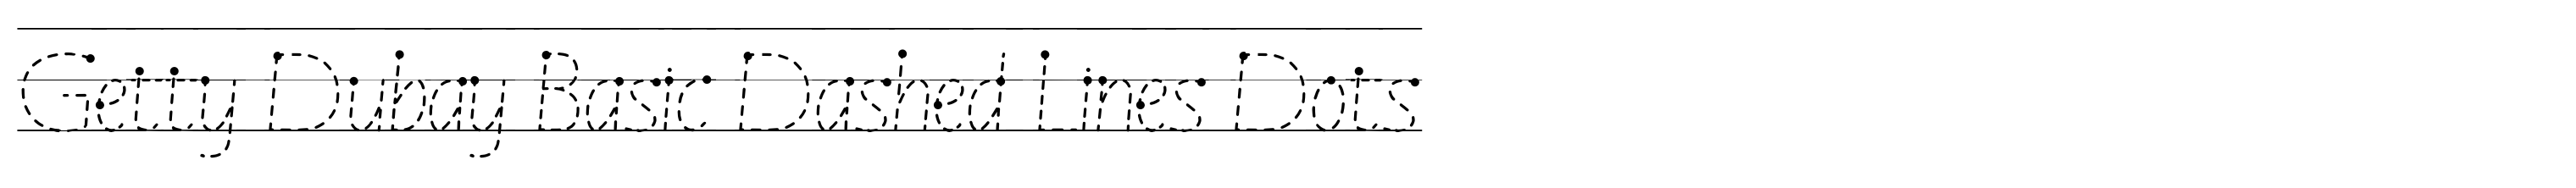 Getty Dubay Basic Dashed Lines Dots